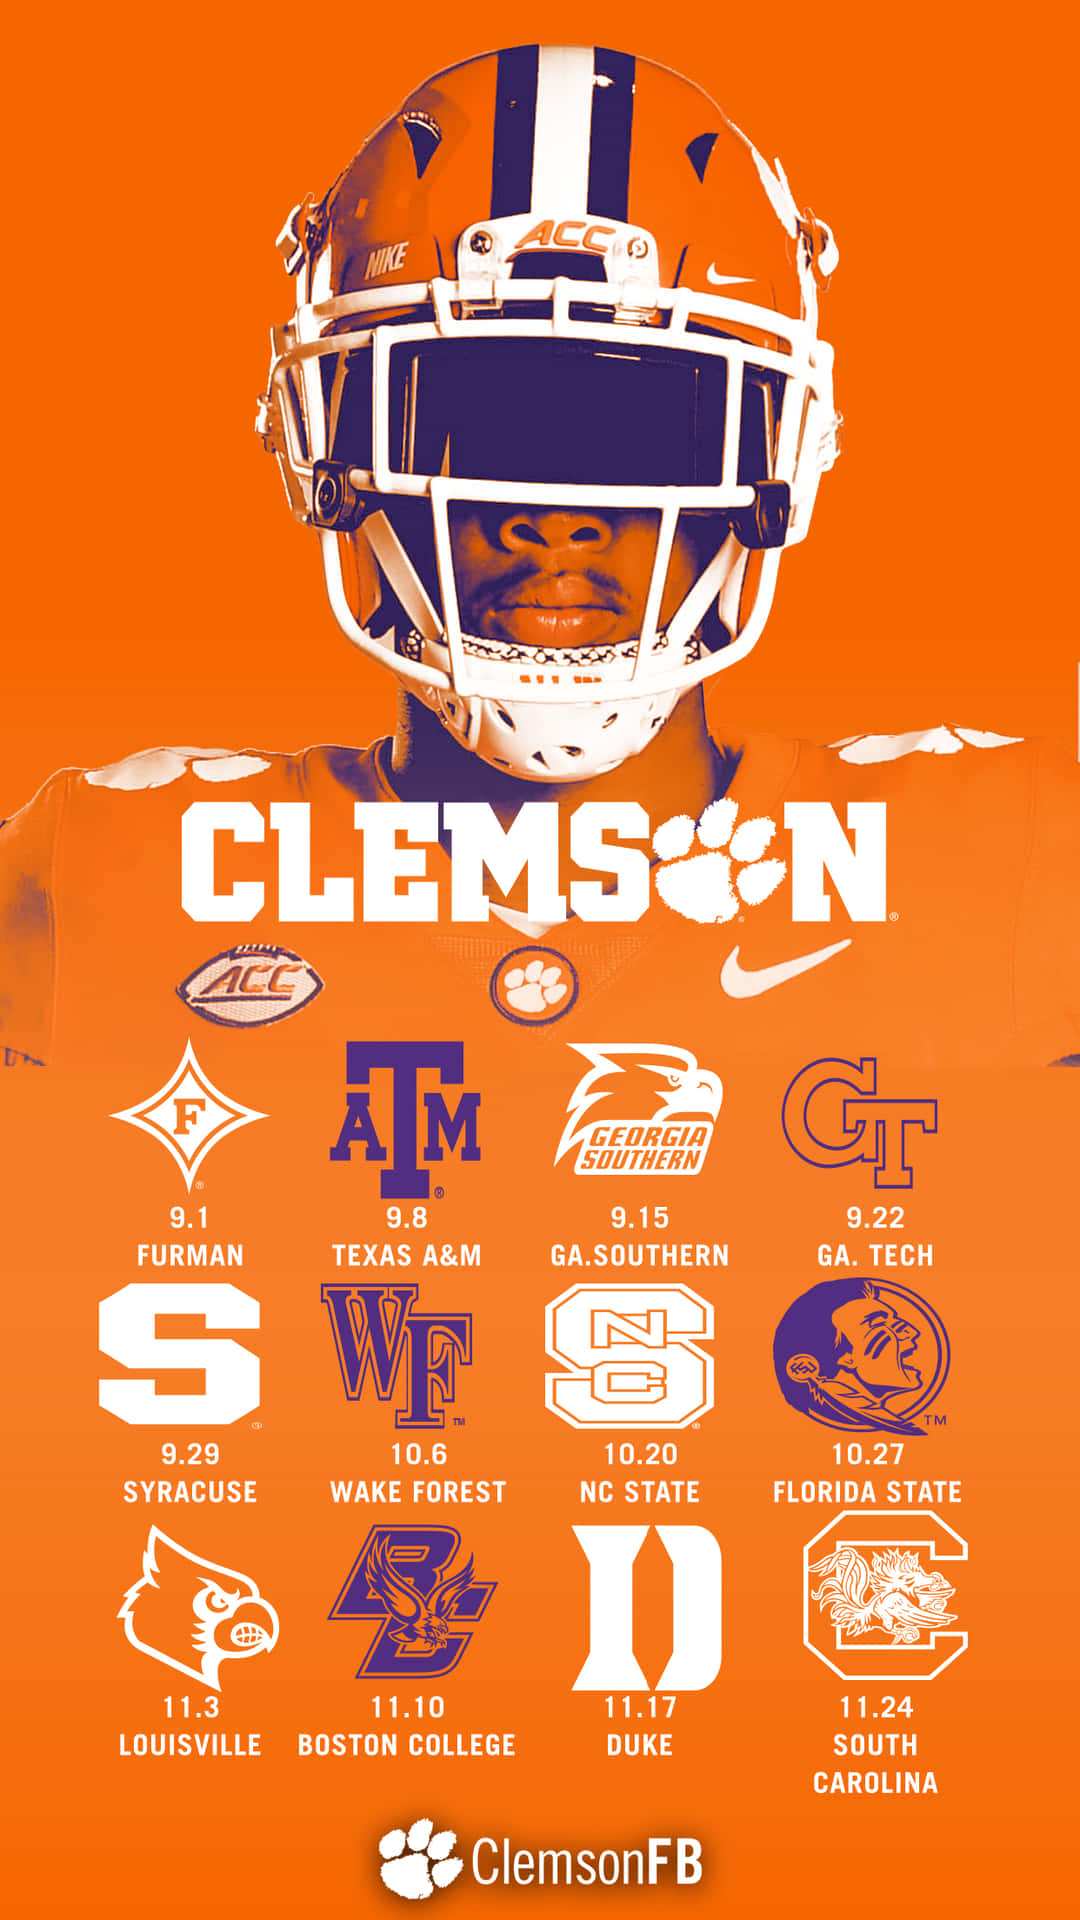 "Stay connected with Clemson Tigers news on your iPhone!" Wallpaper